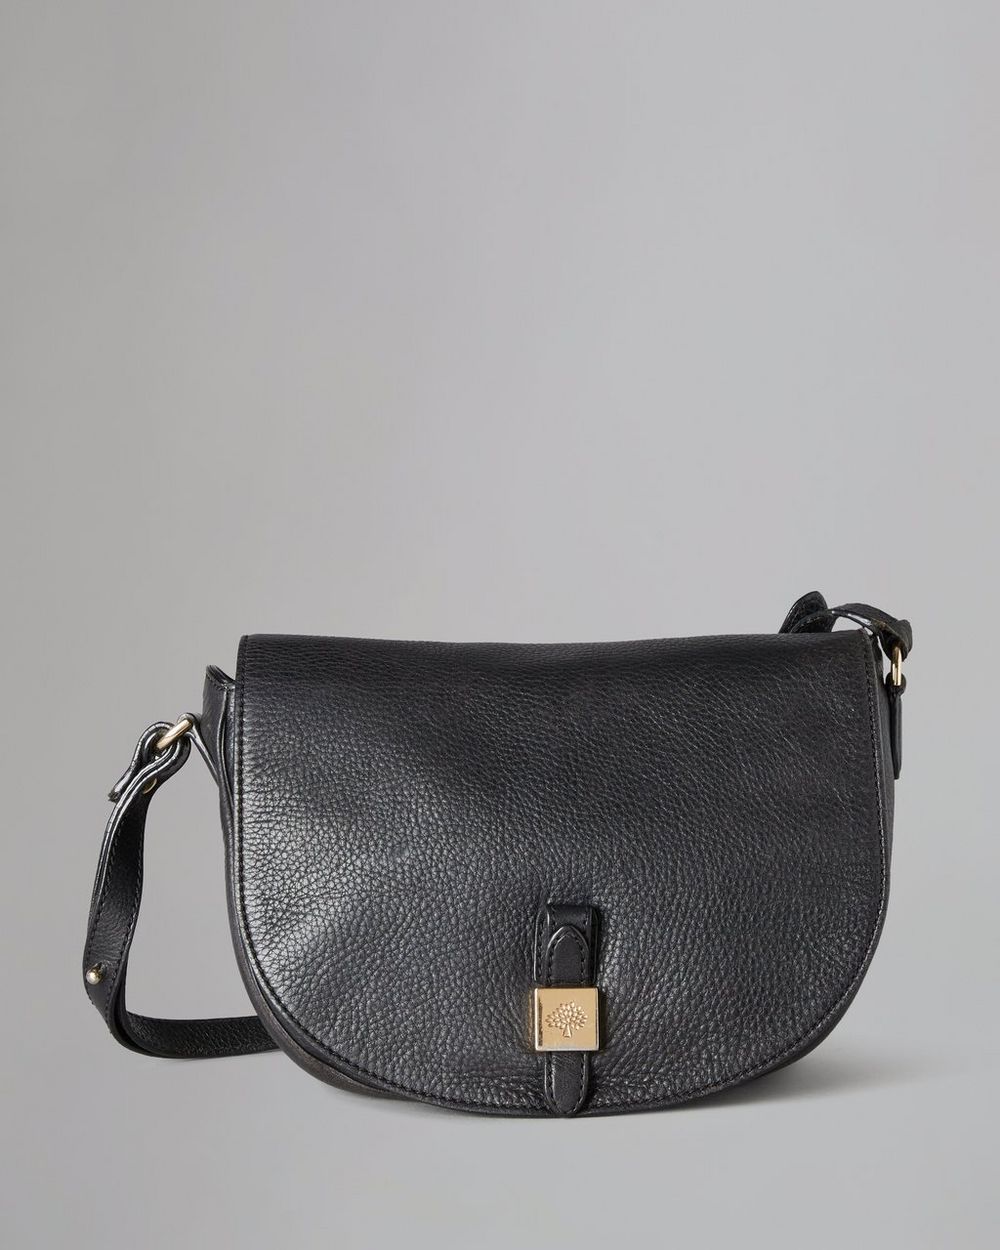 Mulberry Tessie Clutch in Black Small Soft Grain Leather - SOLD